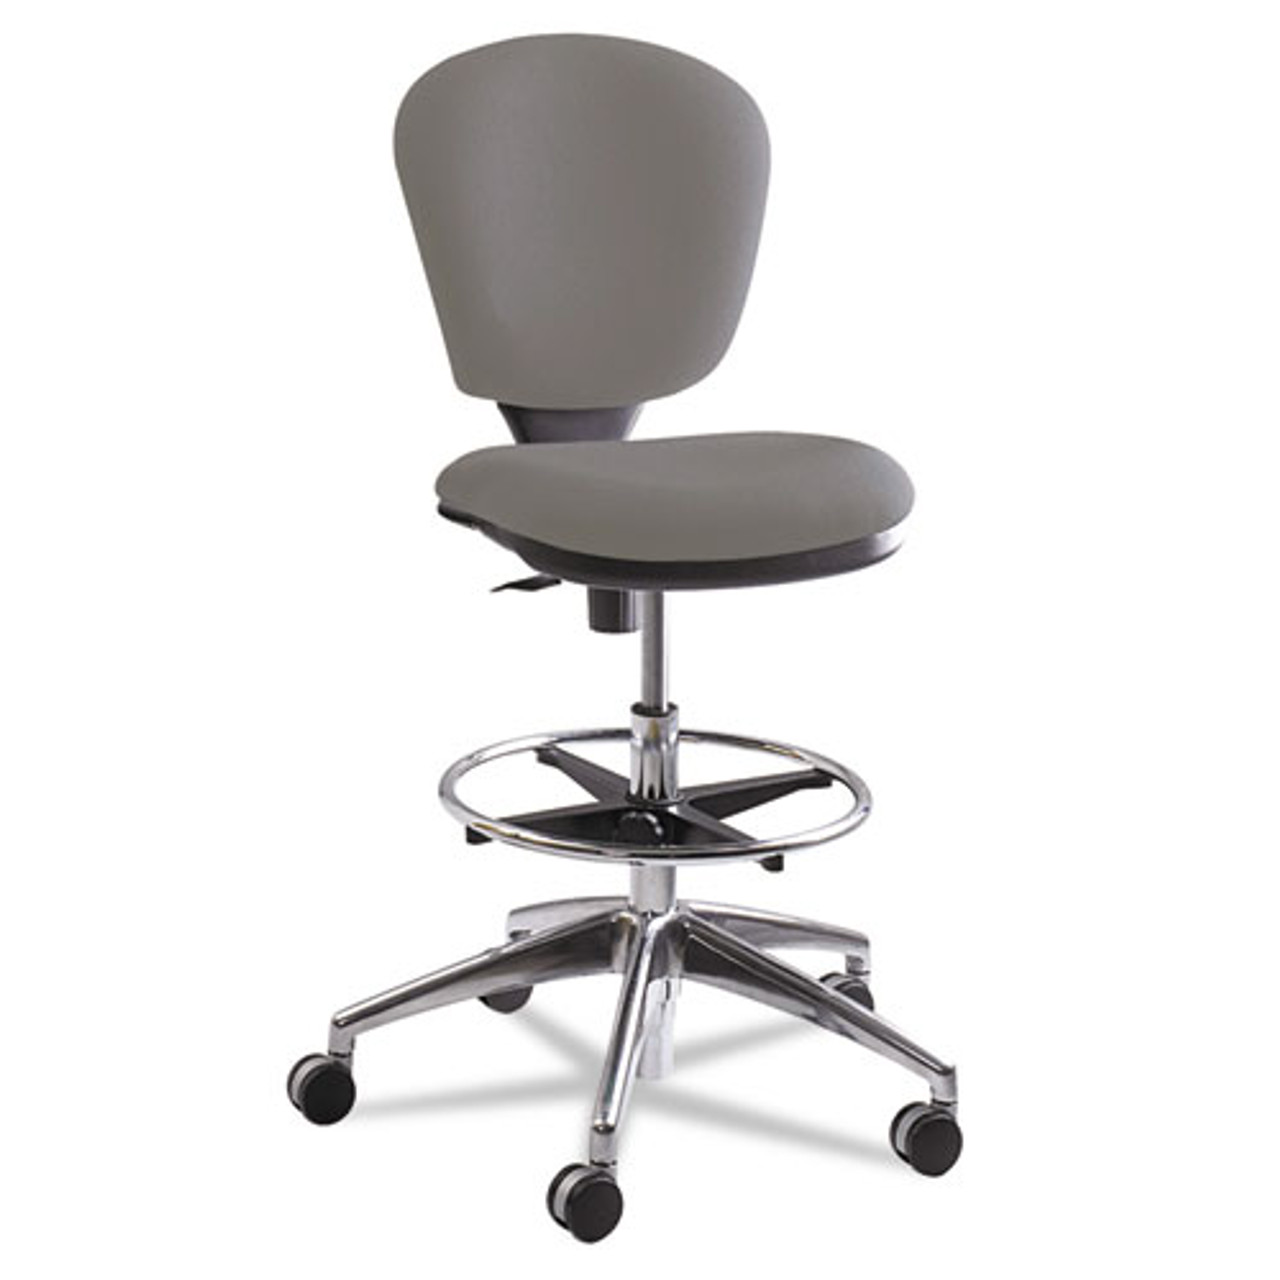 Metro Collection Extended Height Swivel/tilt Chair, Gray Fabric, #SF-2331-GR